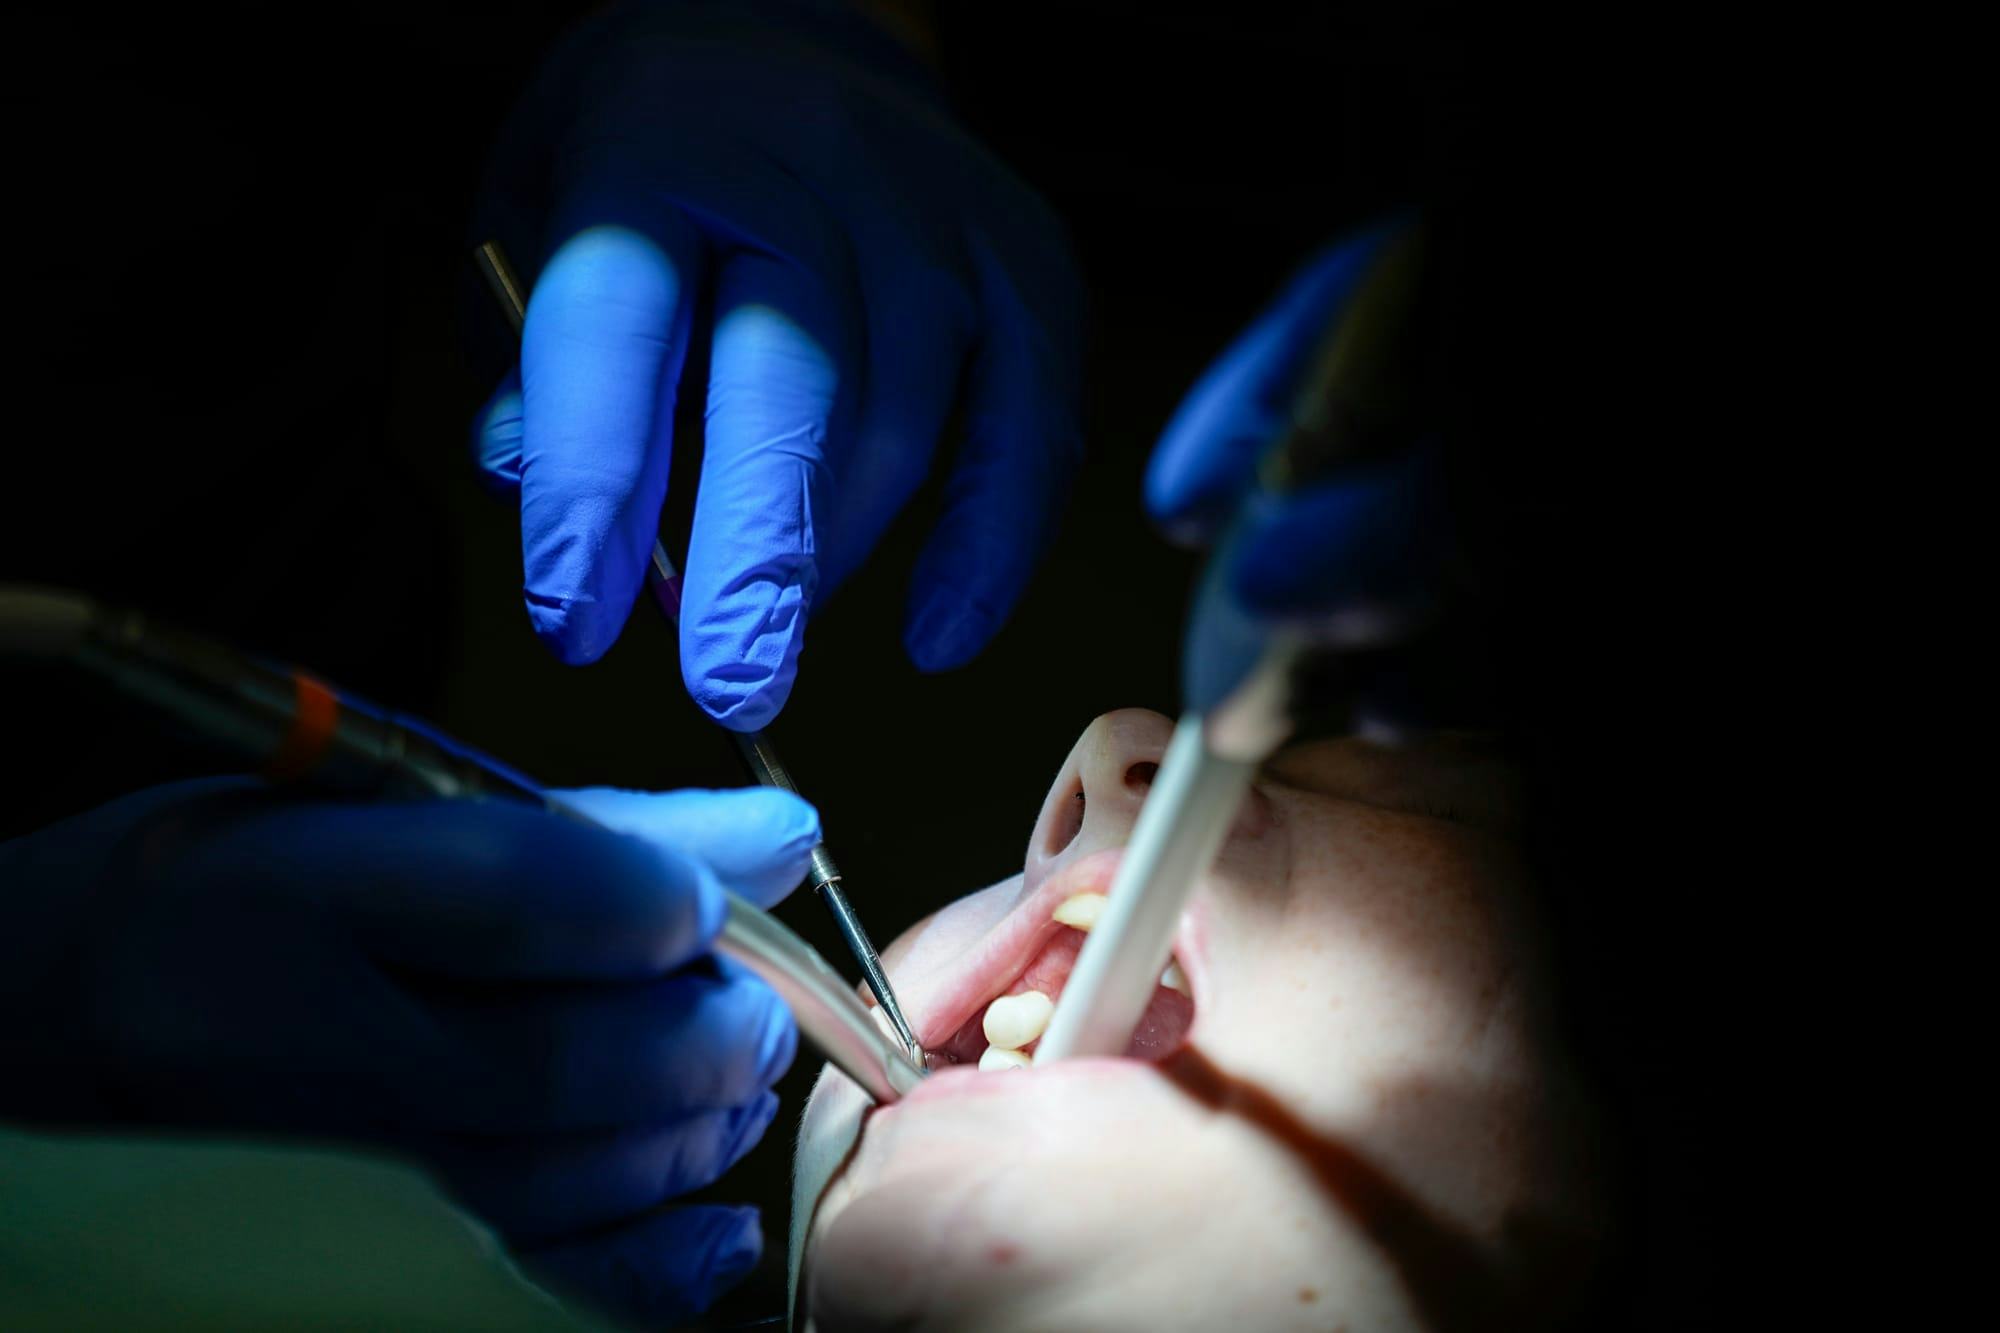 Insurance providers lobbying to ensure federal dental care won’t disrupt private coverage